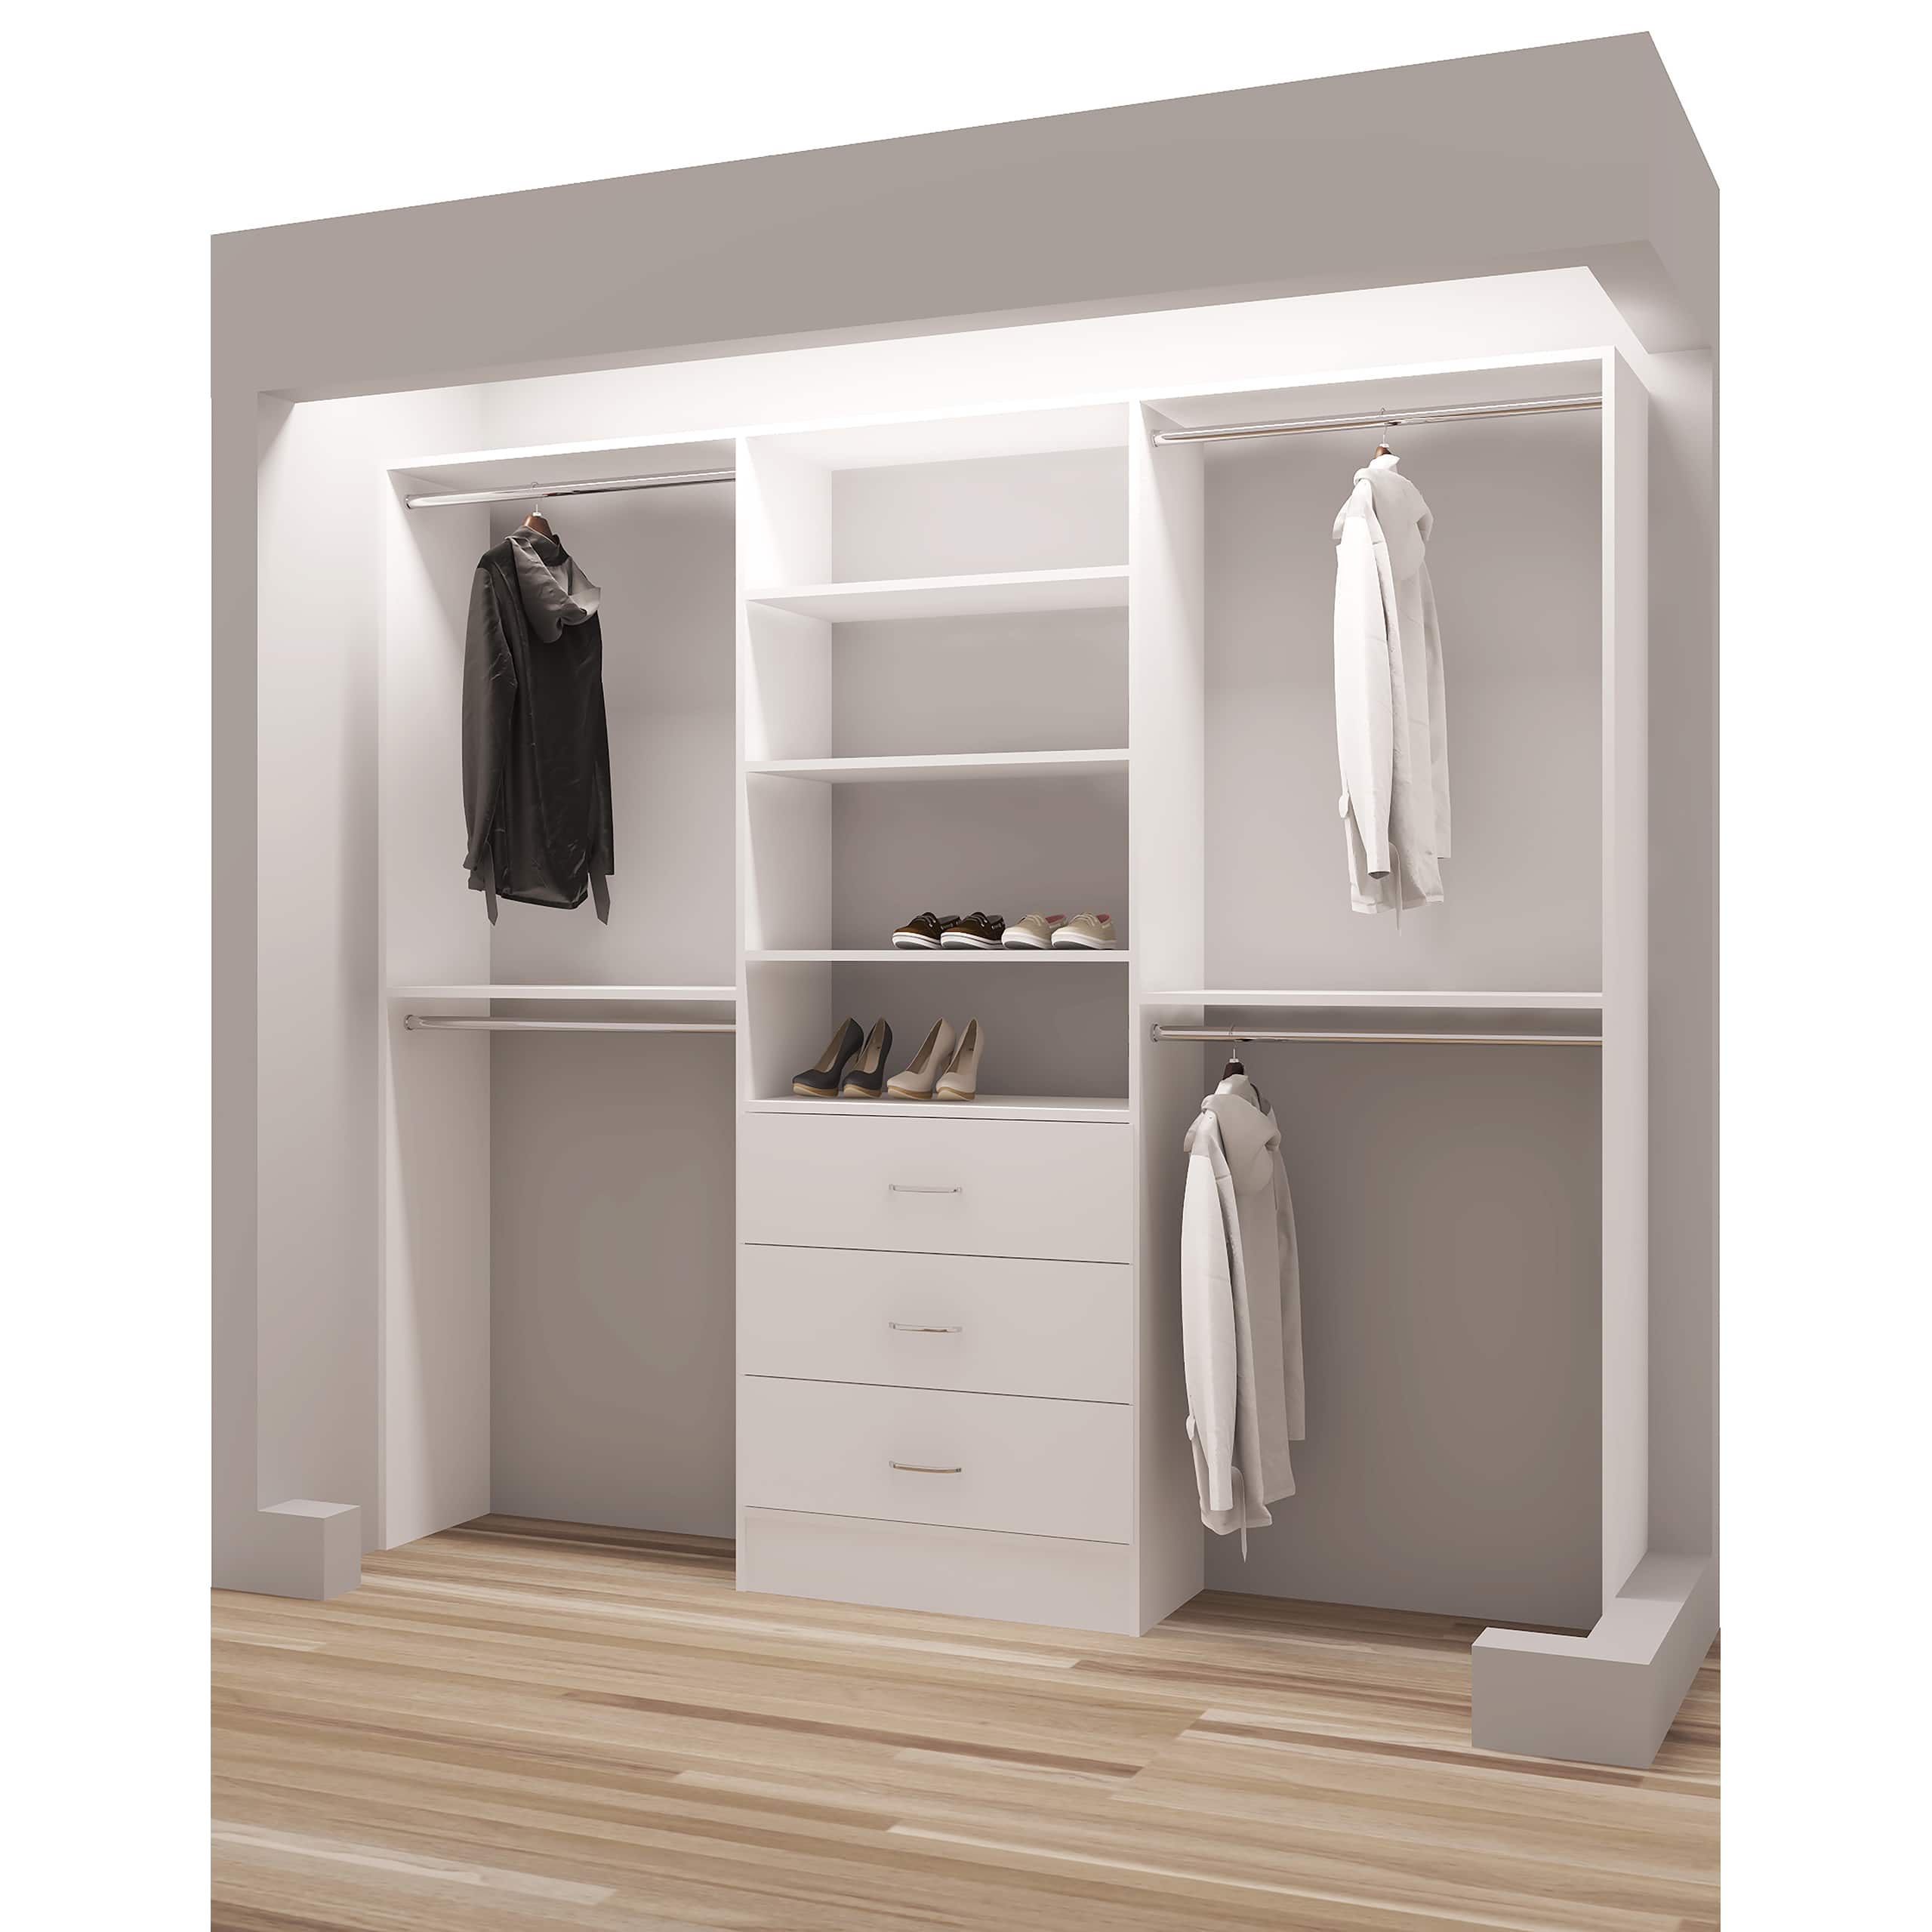 Buy Closet Organizers Systems Online at Overstock com Our Best